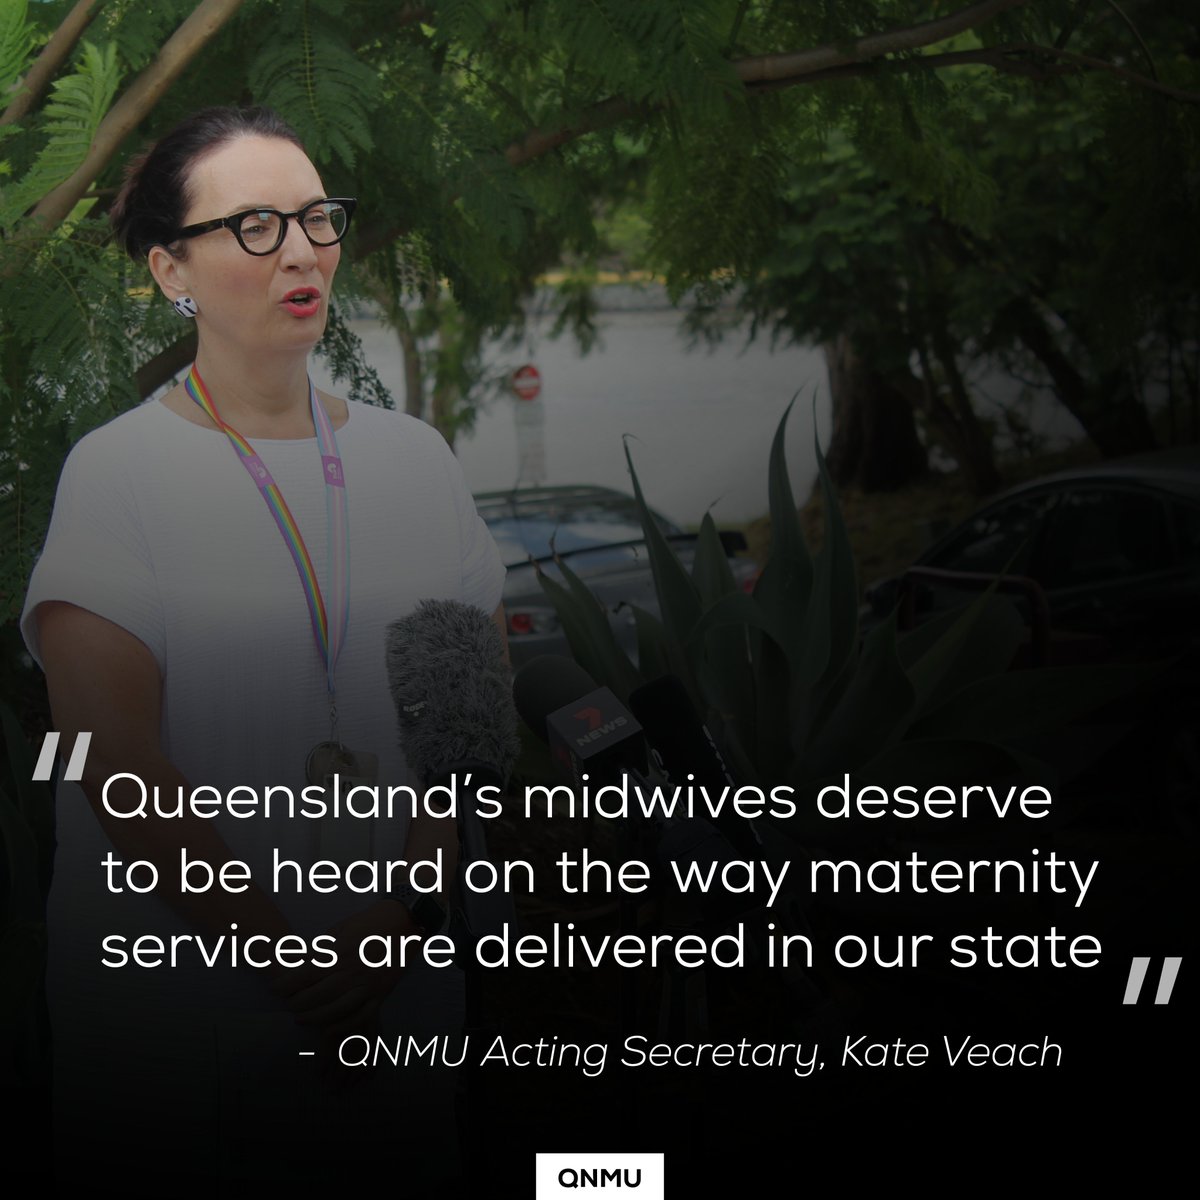 QNMU Acting Secretary Kate Veach calls for a midwife-led approach to midwifery workforce planning and models of care ahead of QLD government's June 16 midwifery round table: bit.ly/3CqerpD